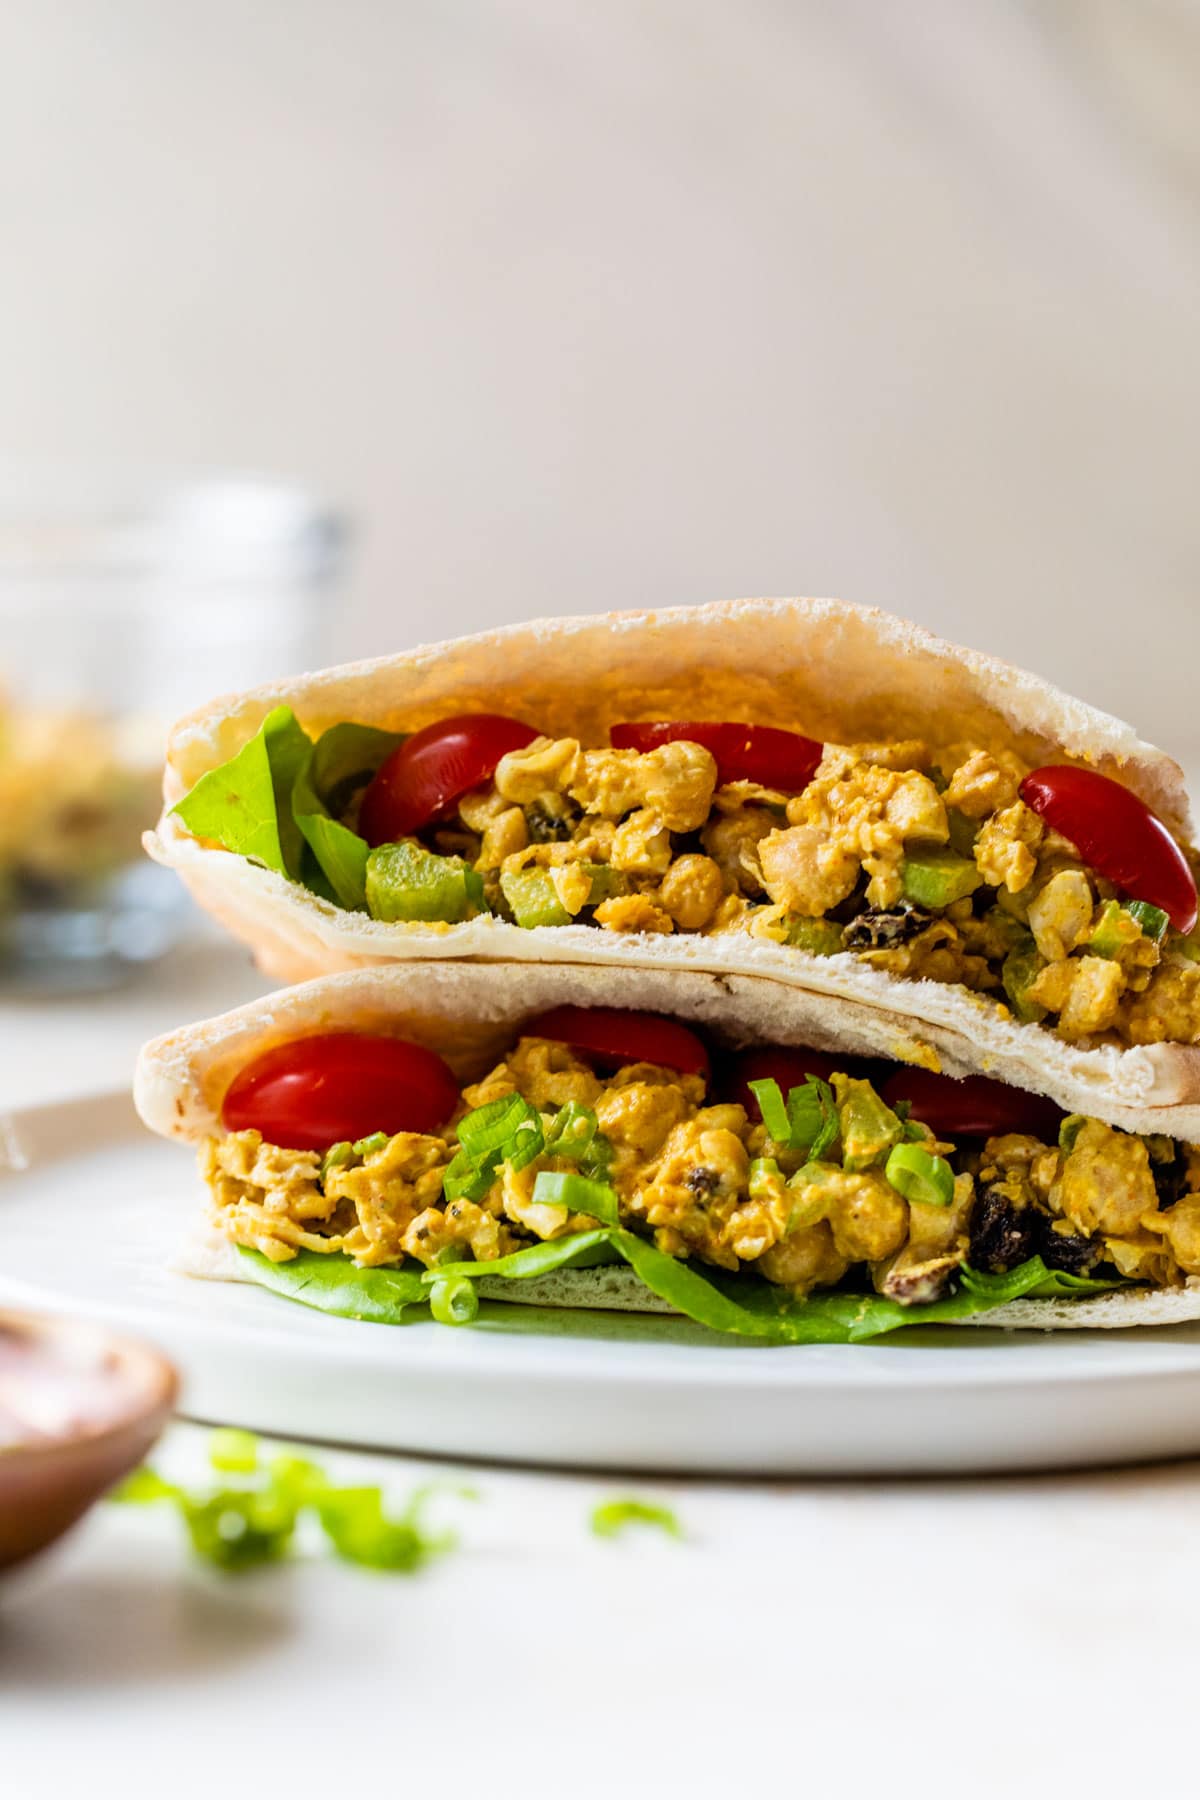 Chickpea Salad Sandwiches: A Satisfying and Budget-Friendly Lunch